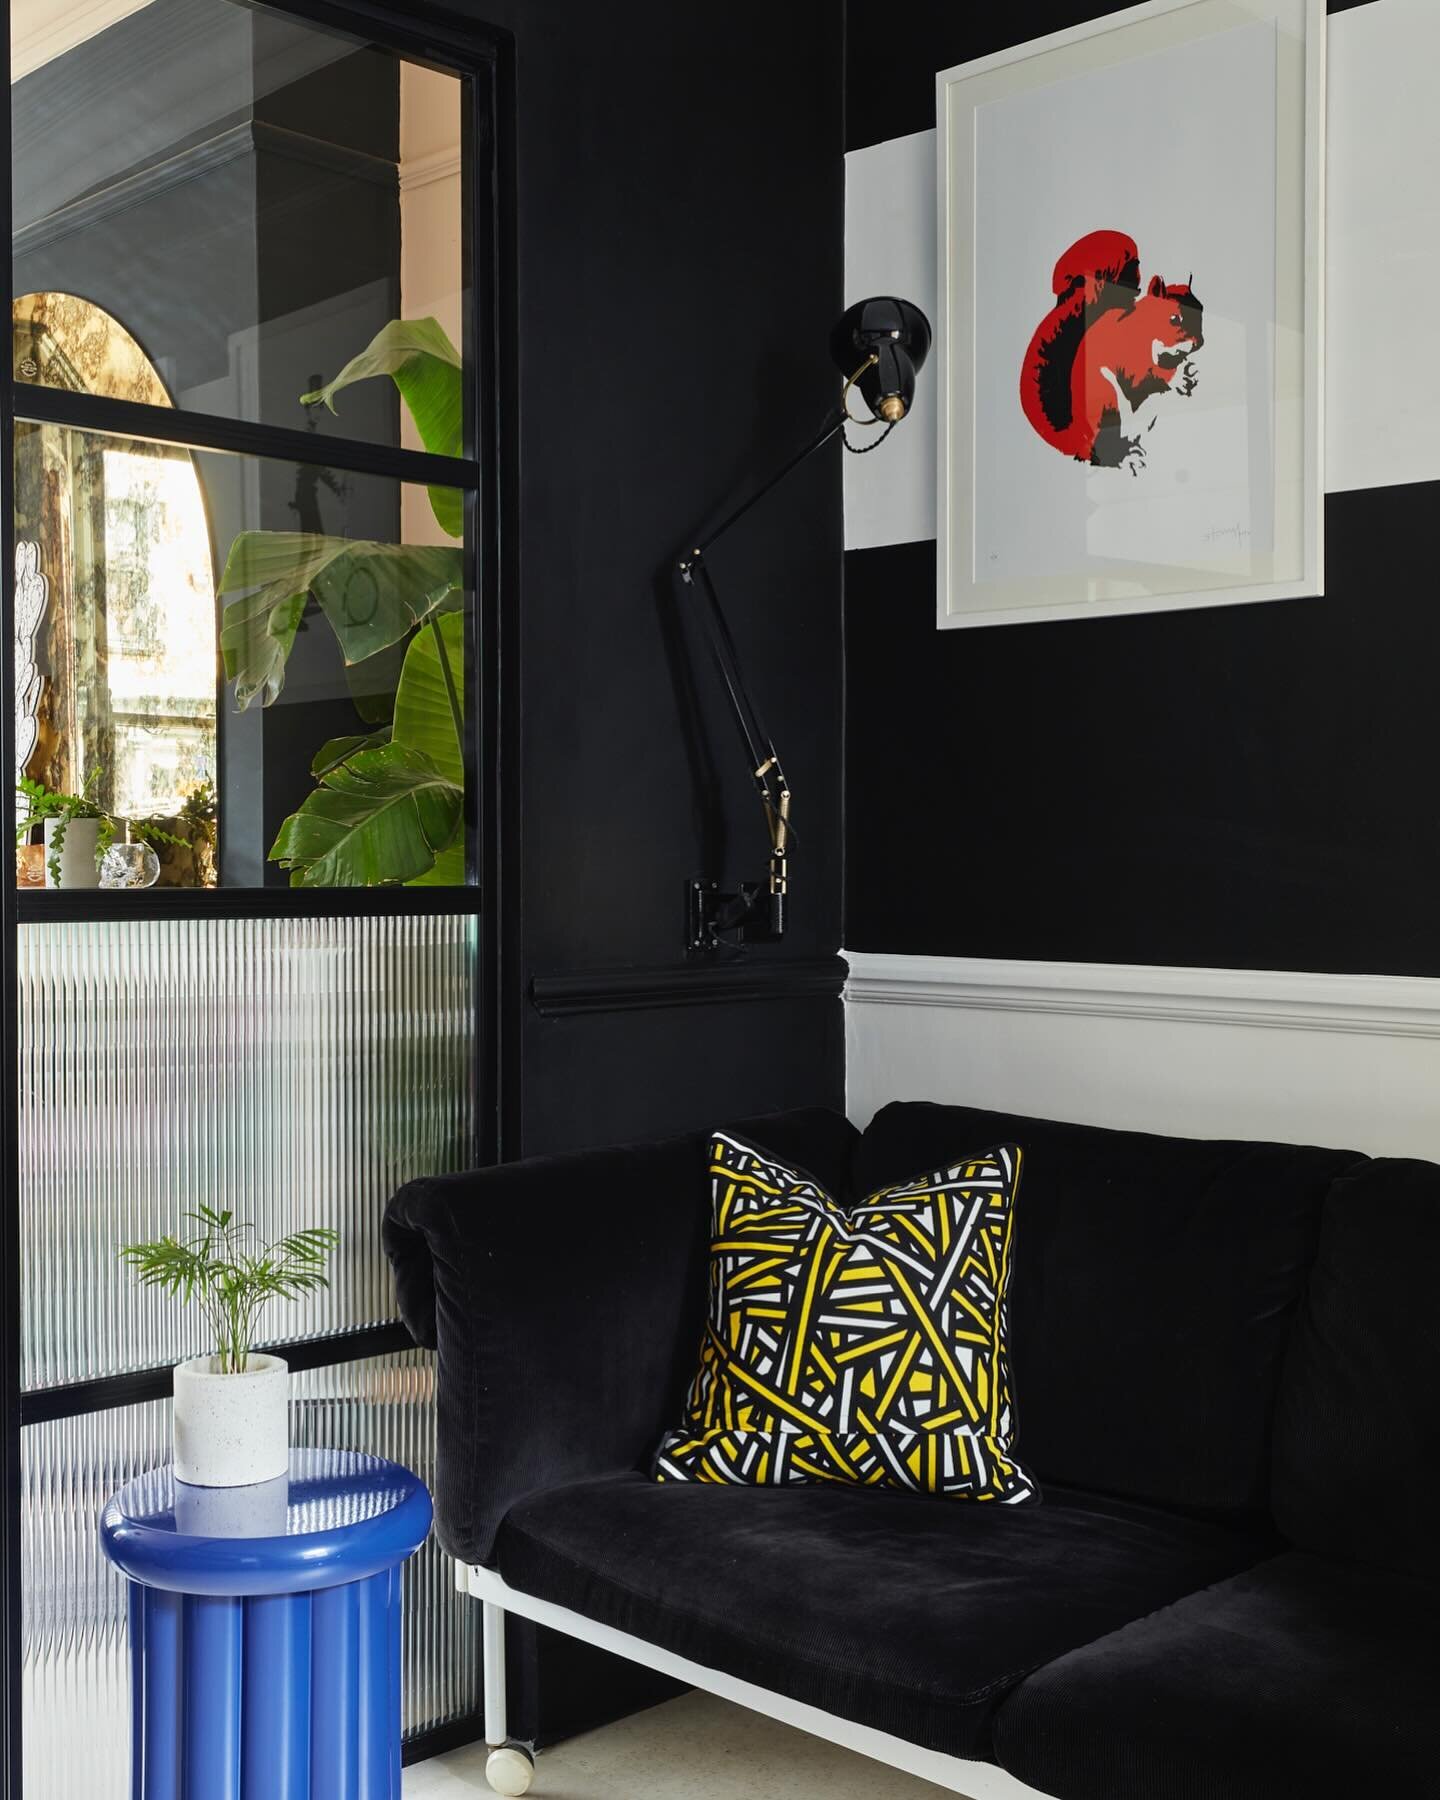 Most popular corner to cosy up in. The black is super enveloping and cocooning. 

Wall mounting the classic black and brass 1227 Anglepoise creates the perfect evening reading spot.

Utilising the power of reeded glass on the lower panels of the glas